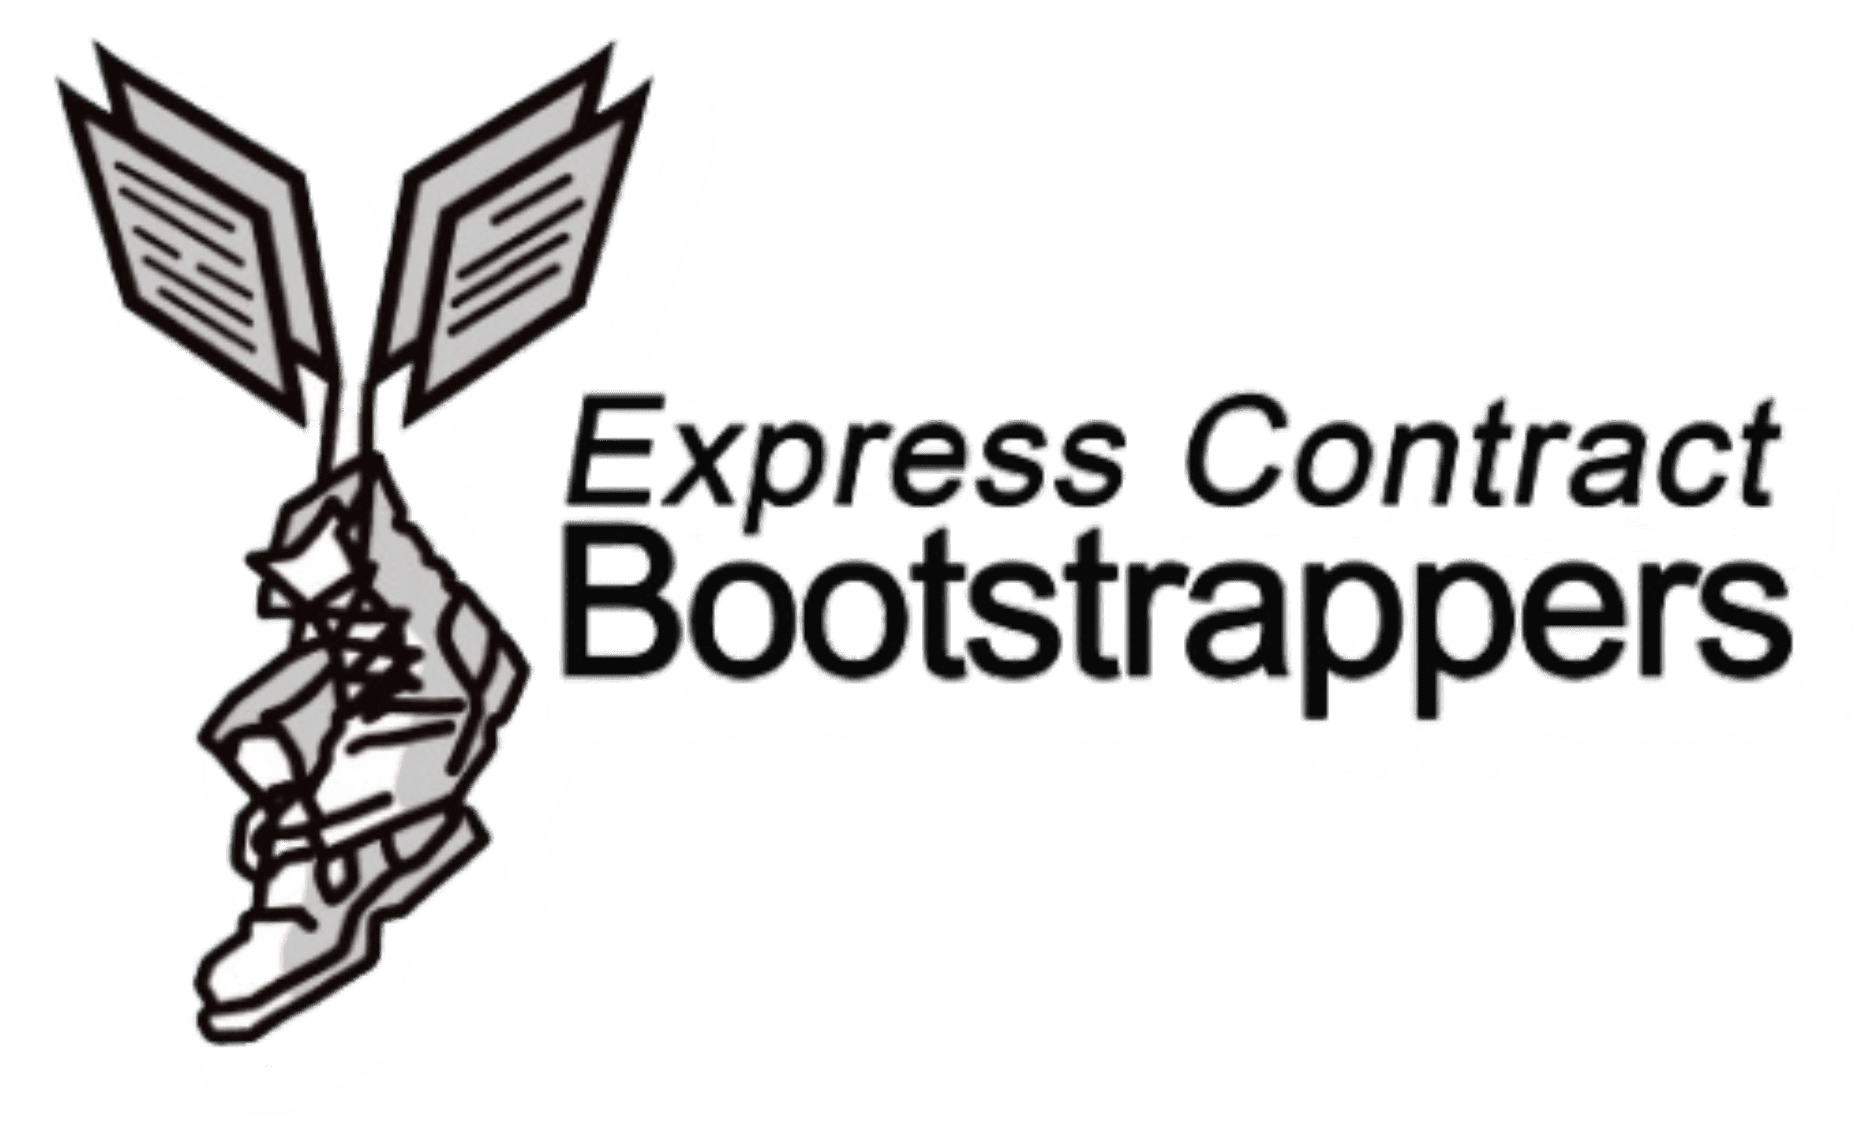 Express Contract Bootstrappers Inc.